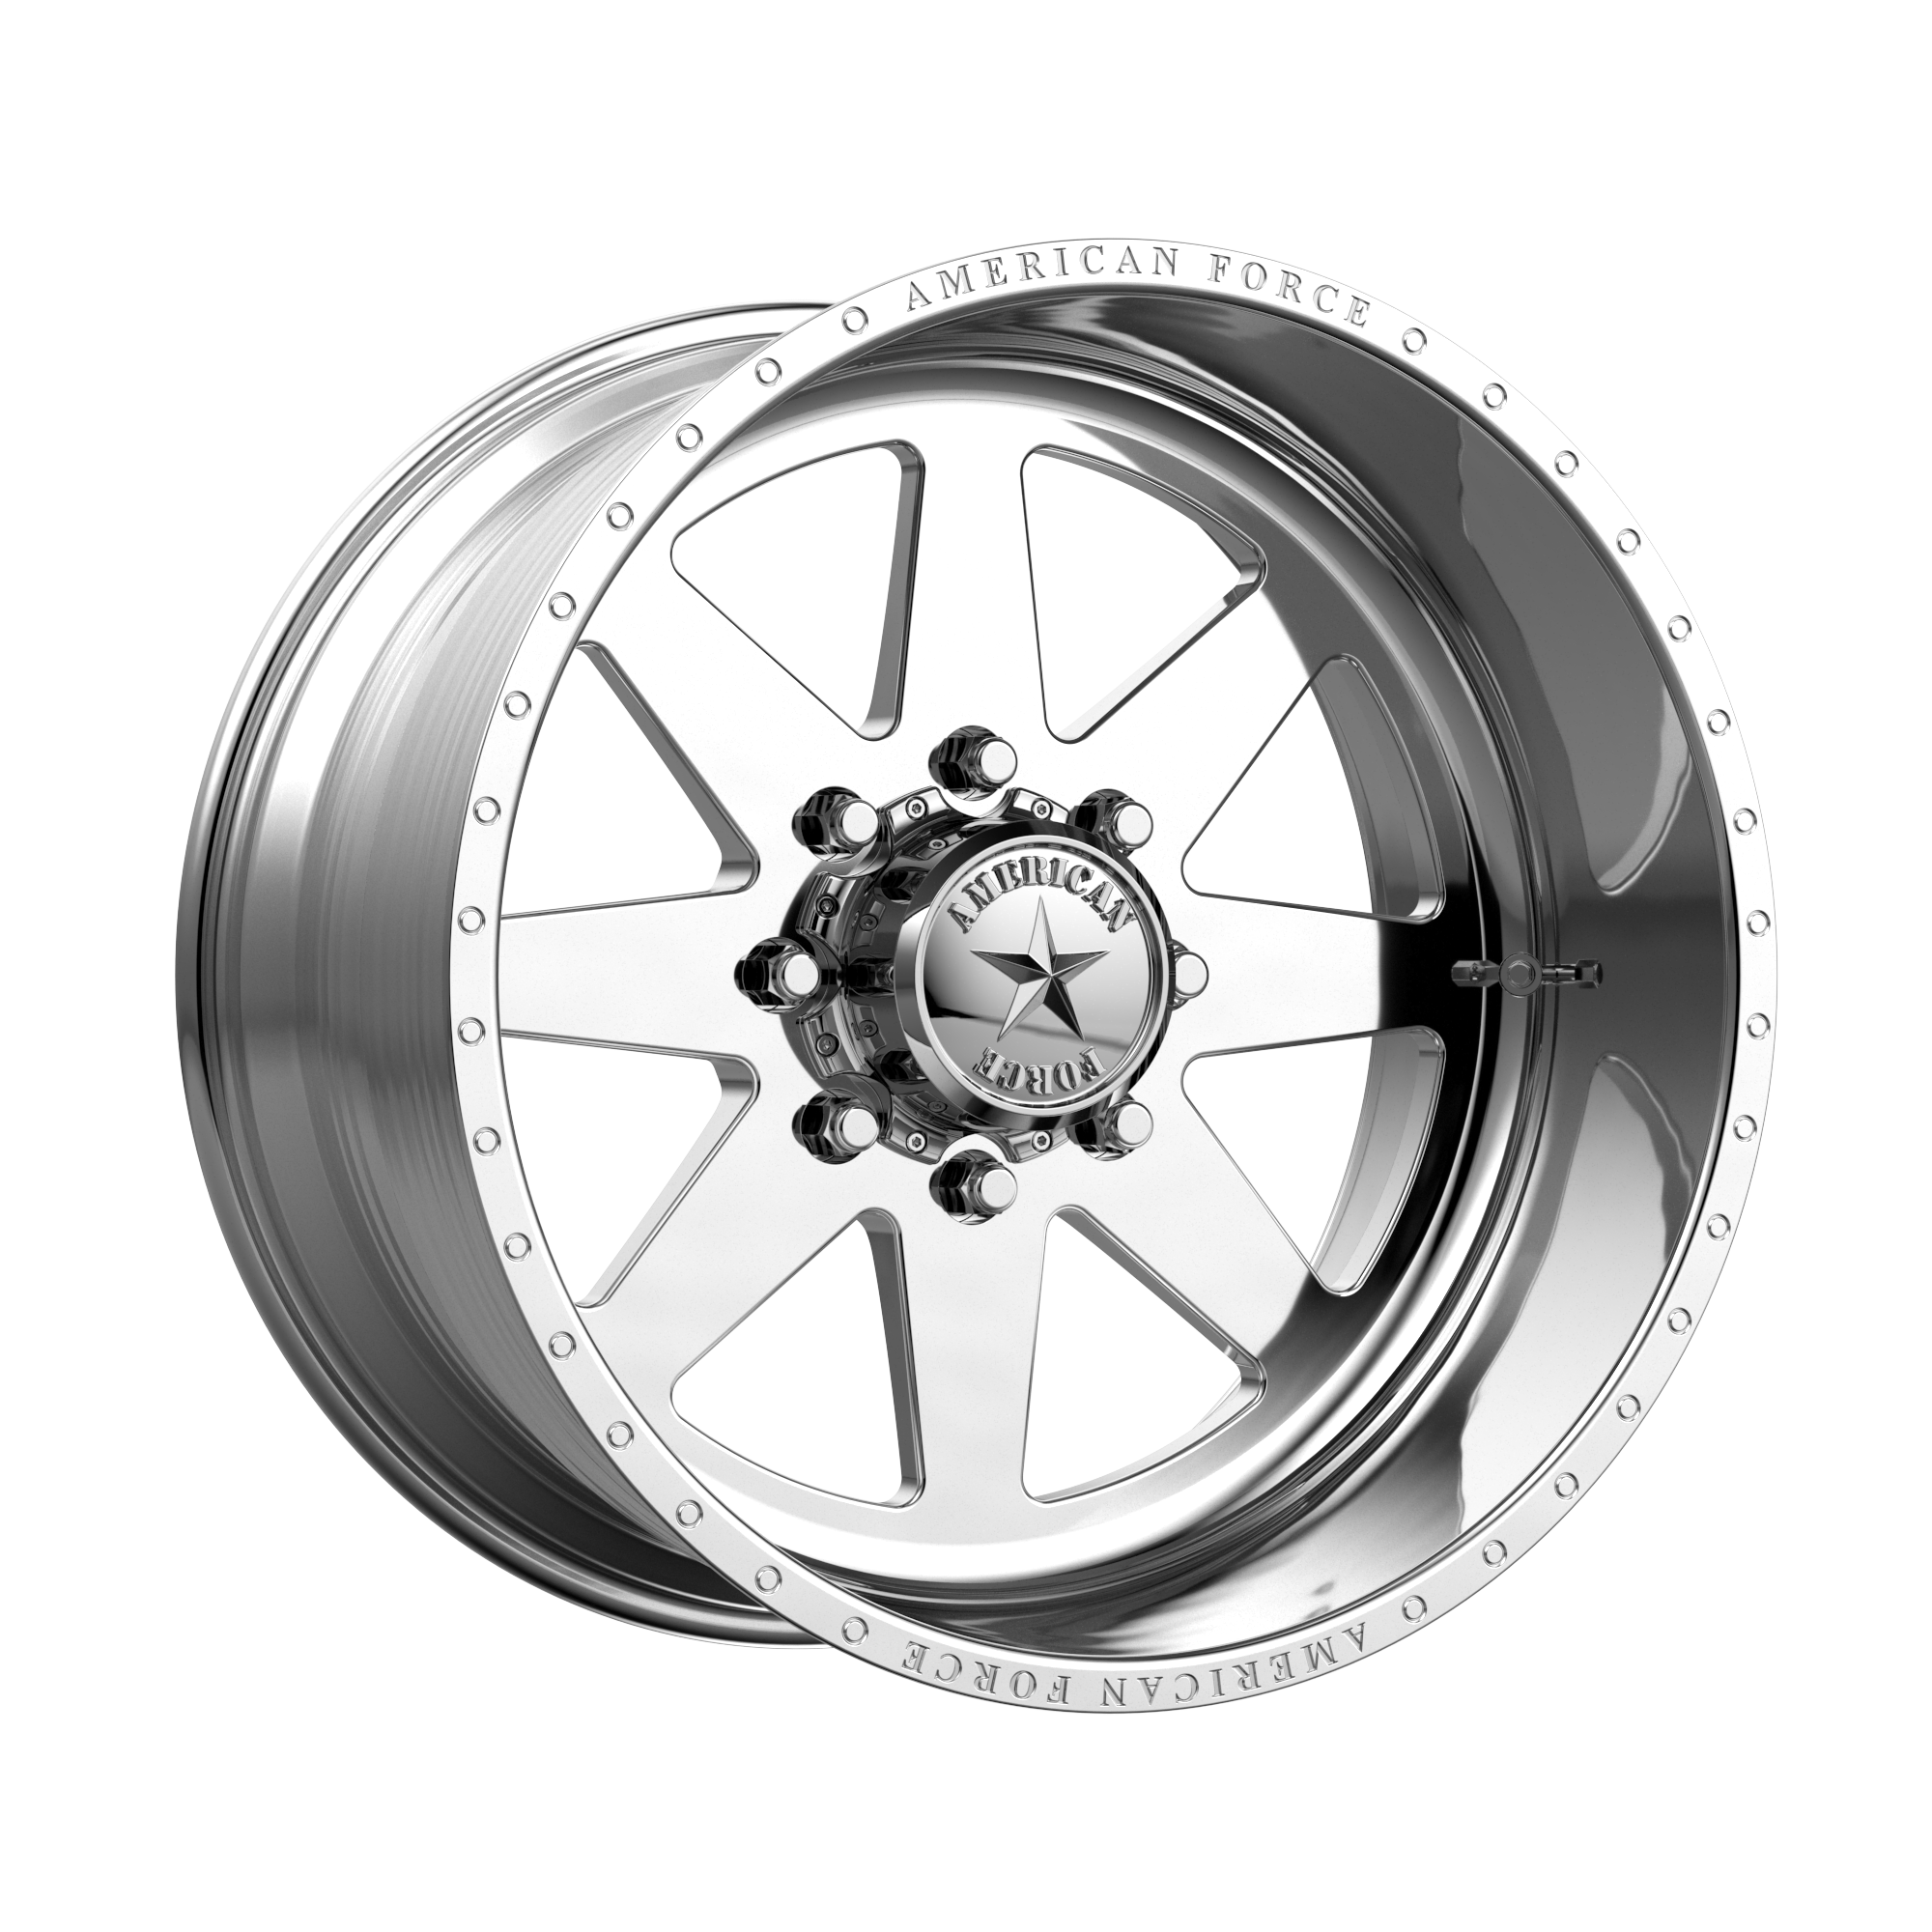 INDEPENDENCE SS 20x12 6x135.00 POLISHED (-40 mm) - Tires and Engine Performance